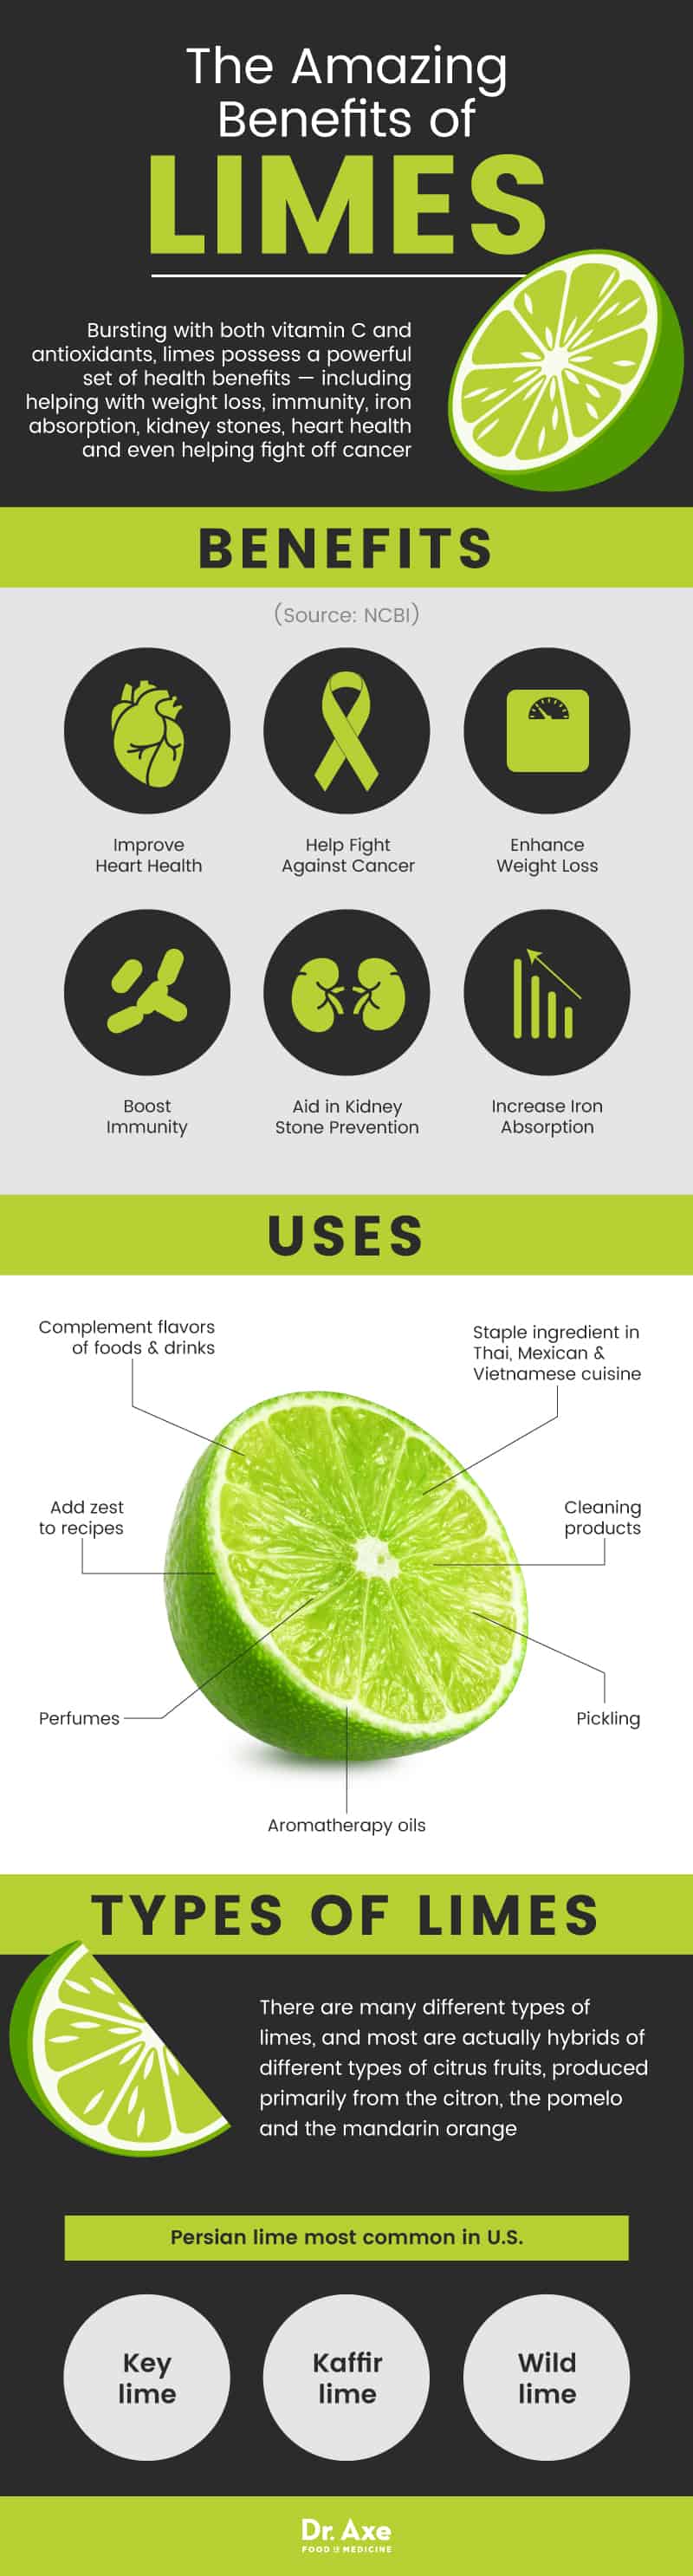 Benefits of limes - Dr. Axe